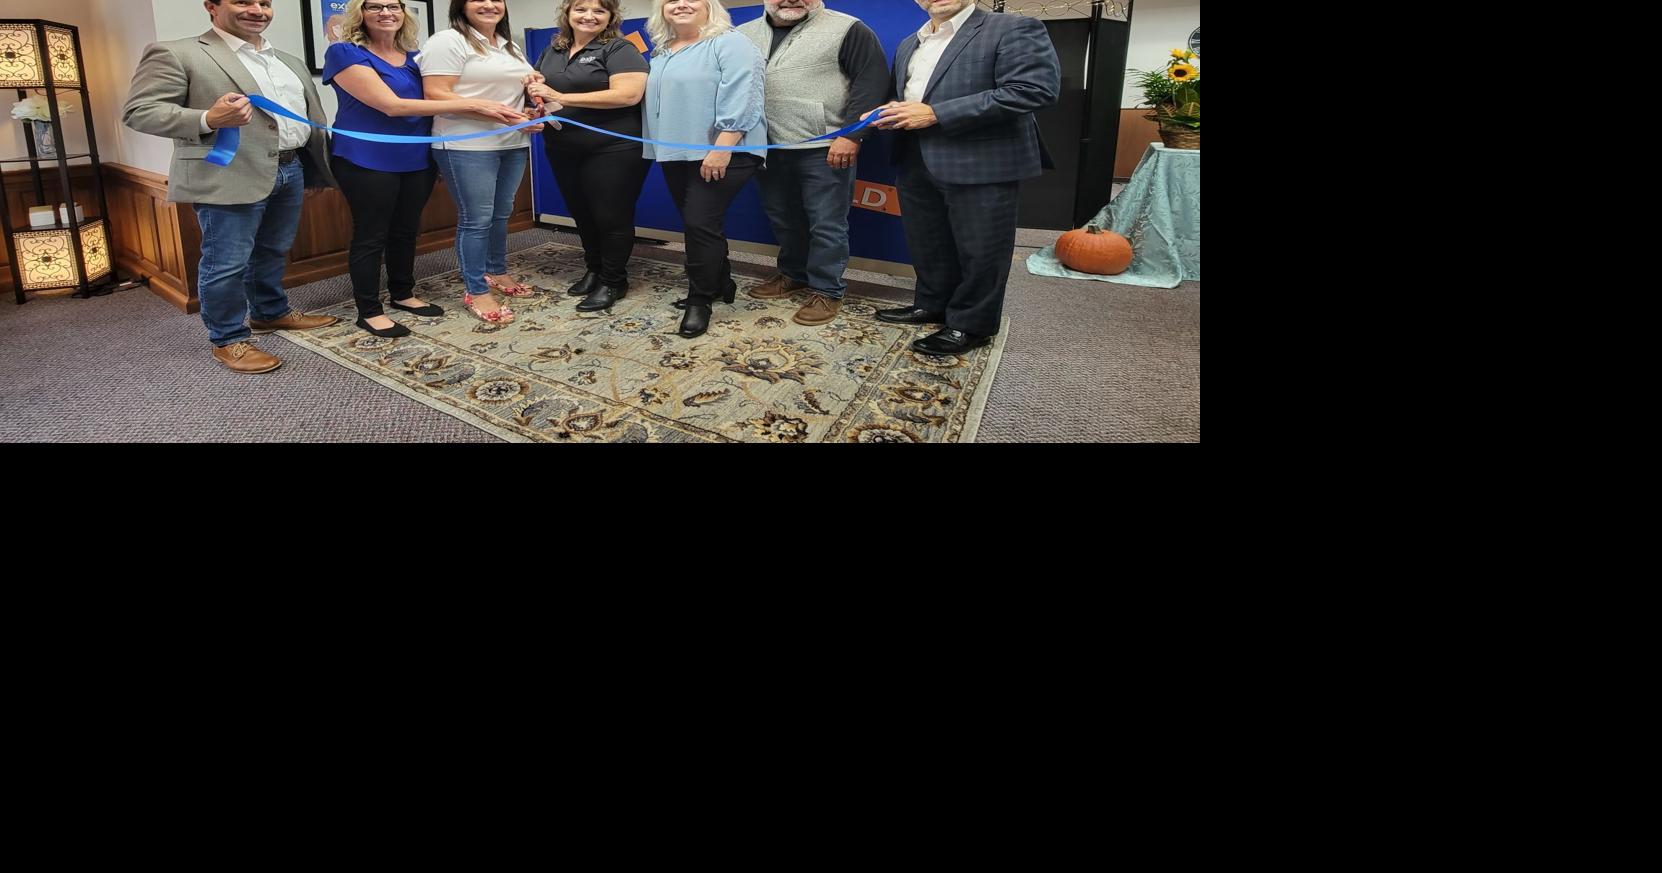 Realty company holds ribbon-cutting | News | indianagazette.com